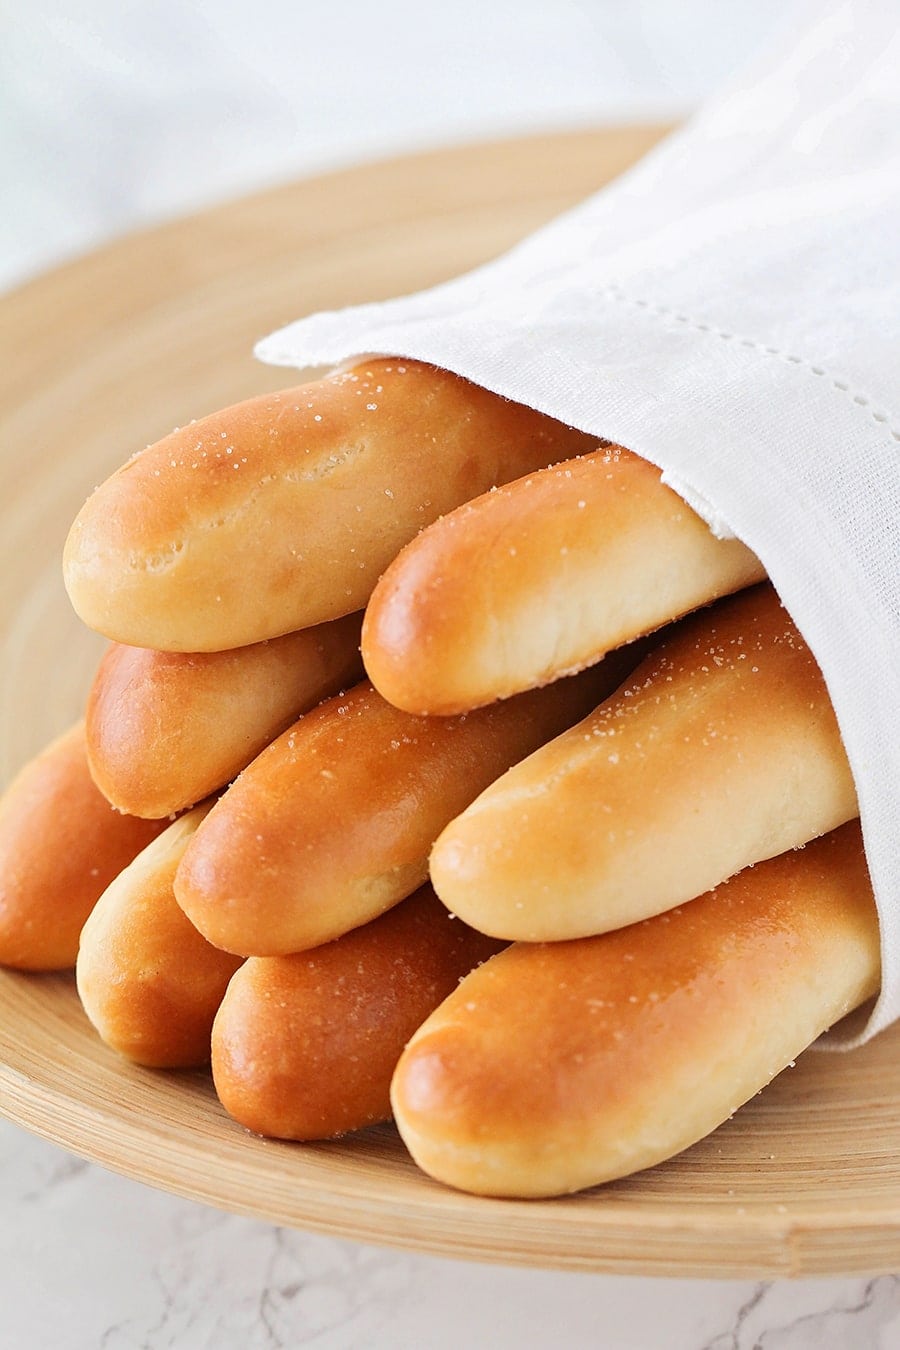 Italian Side Dishes - Olive garden breadsticks piled in a white cloth.